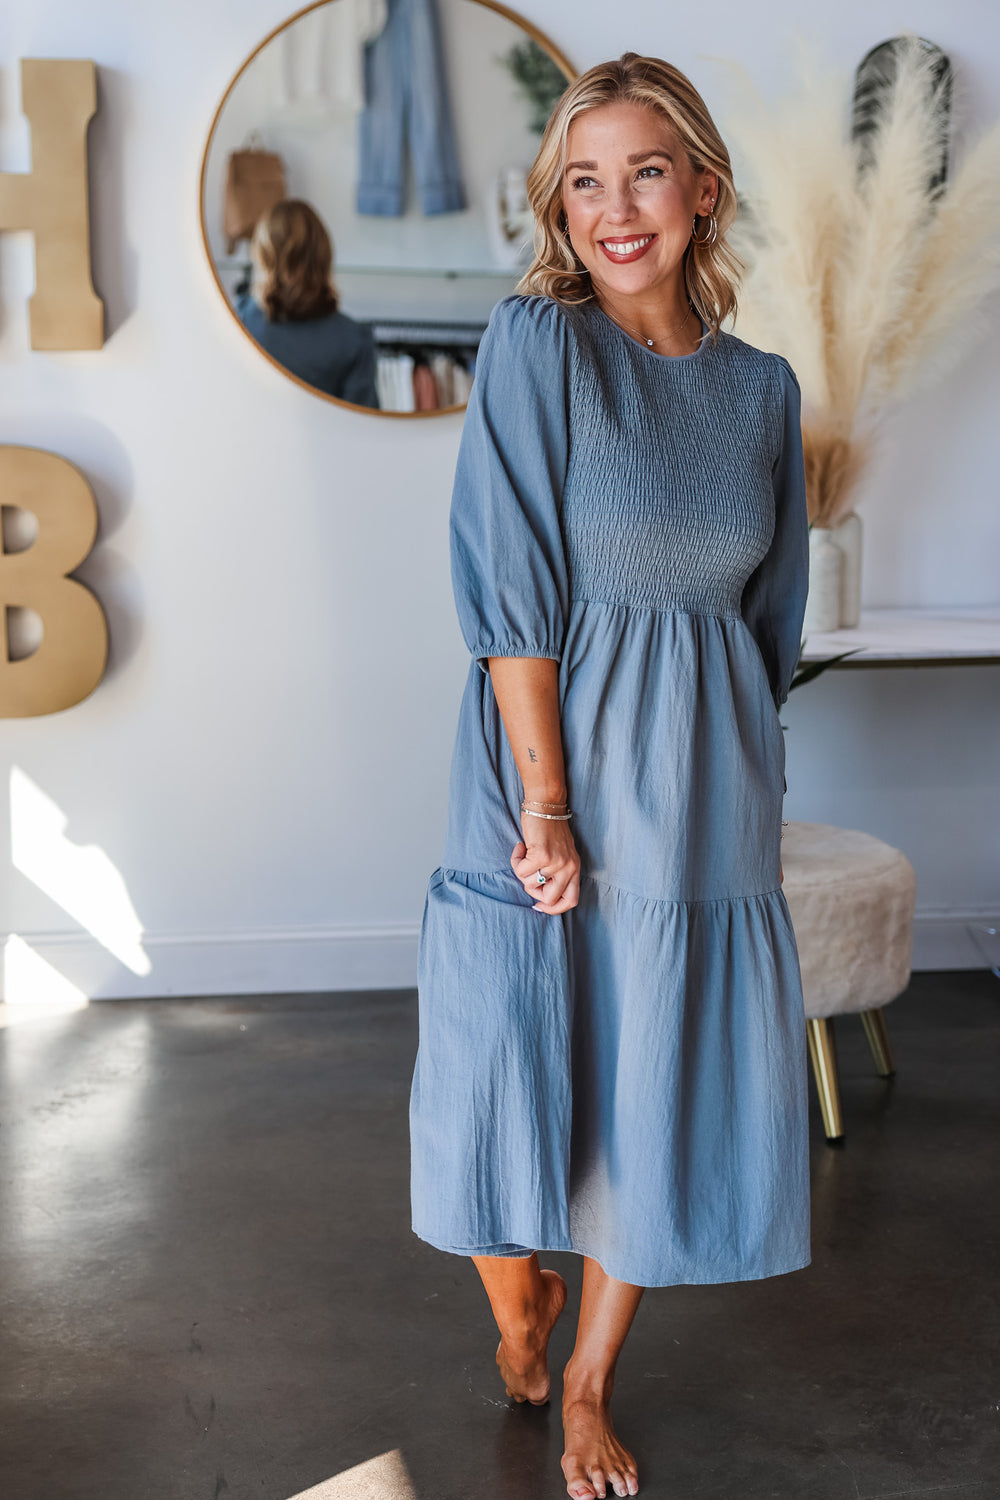 A blonde woman standing in a shop wearing a denim colored dress with 3/4 length sleeves, smocked bodice and tiered skirt.